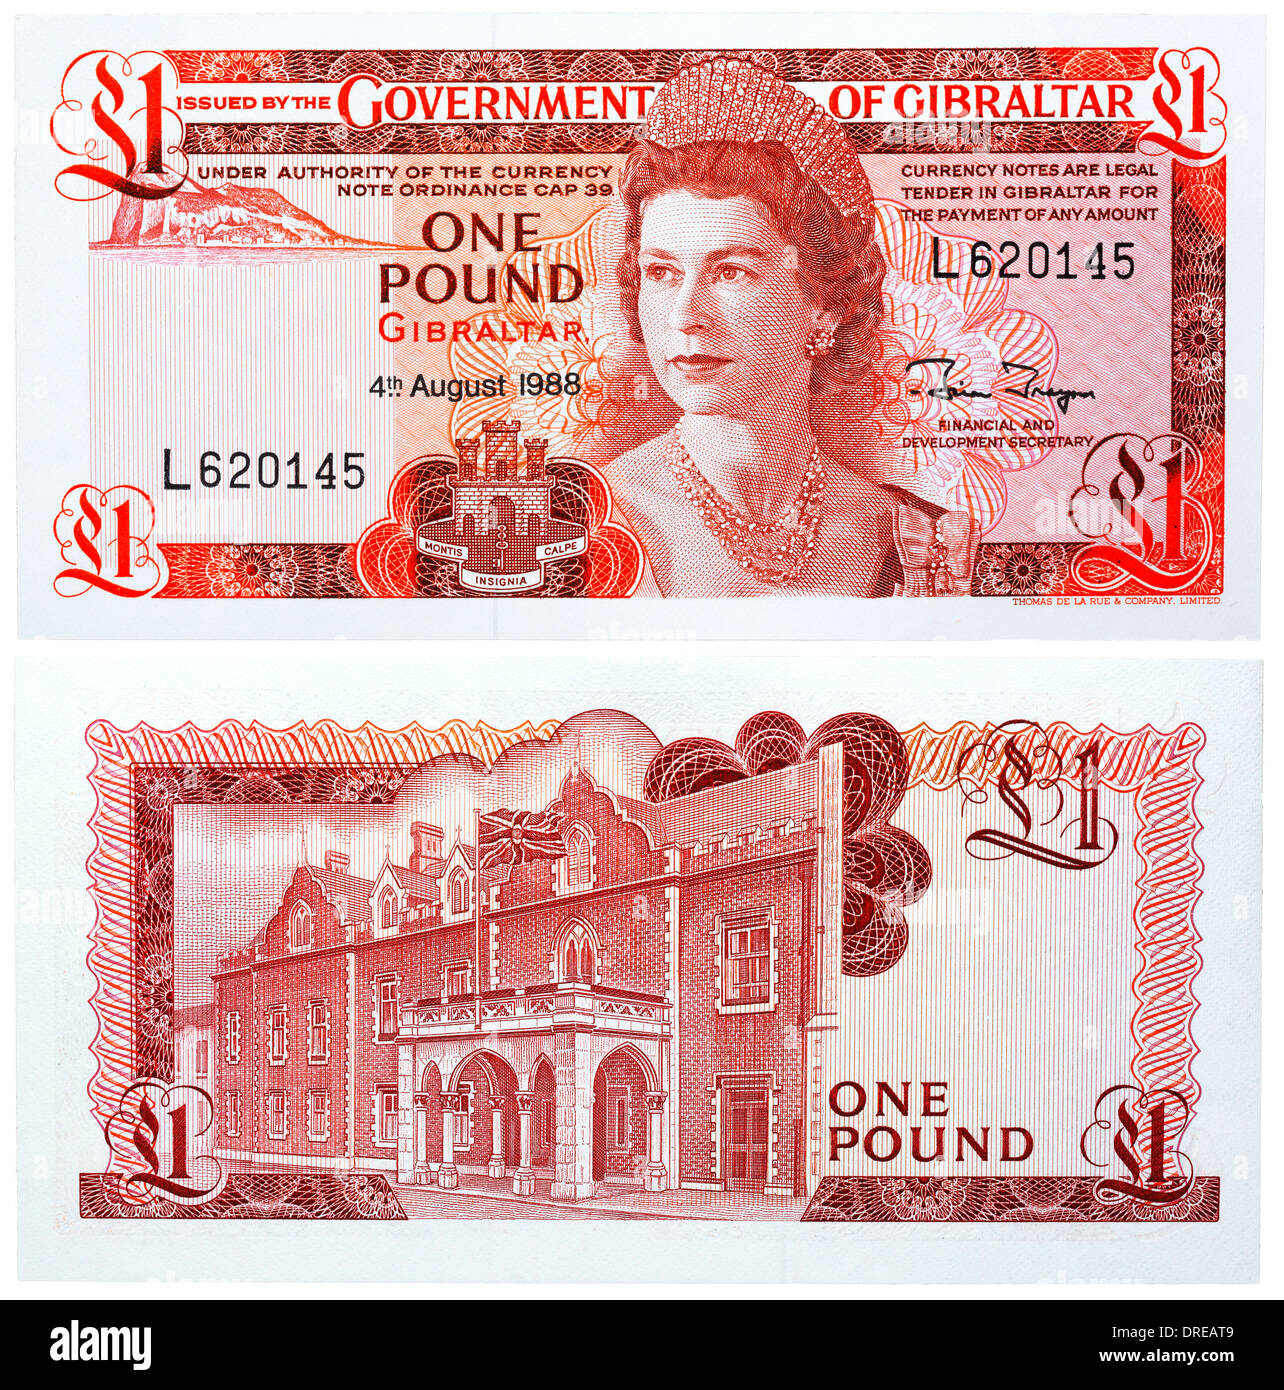 1 Pound banknote, Queen Elizabeth II and Covenant of Gibraltar, Gibraltar, 1988 Stock Photo